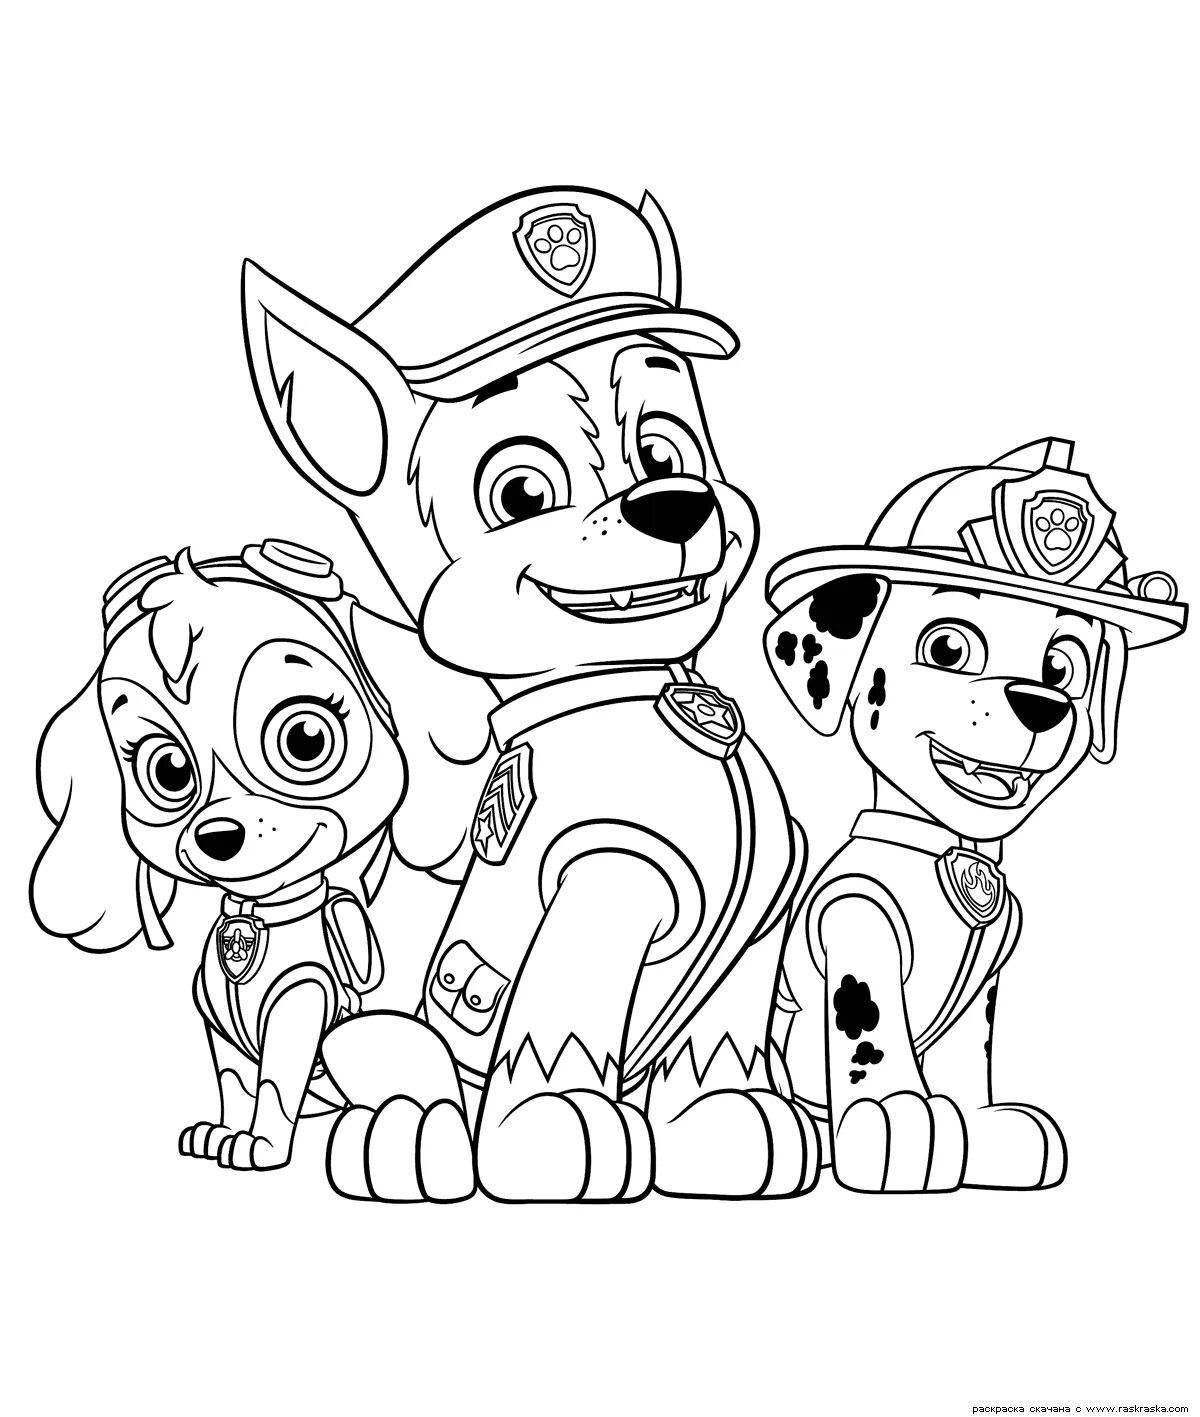 Freedom Paw Patrol playful coloring page